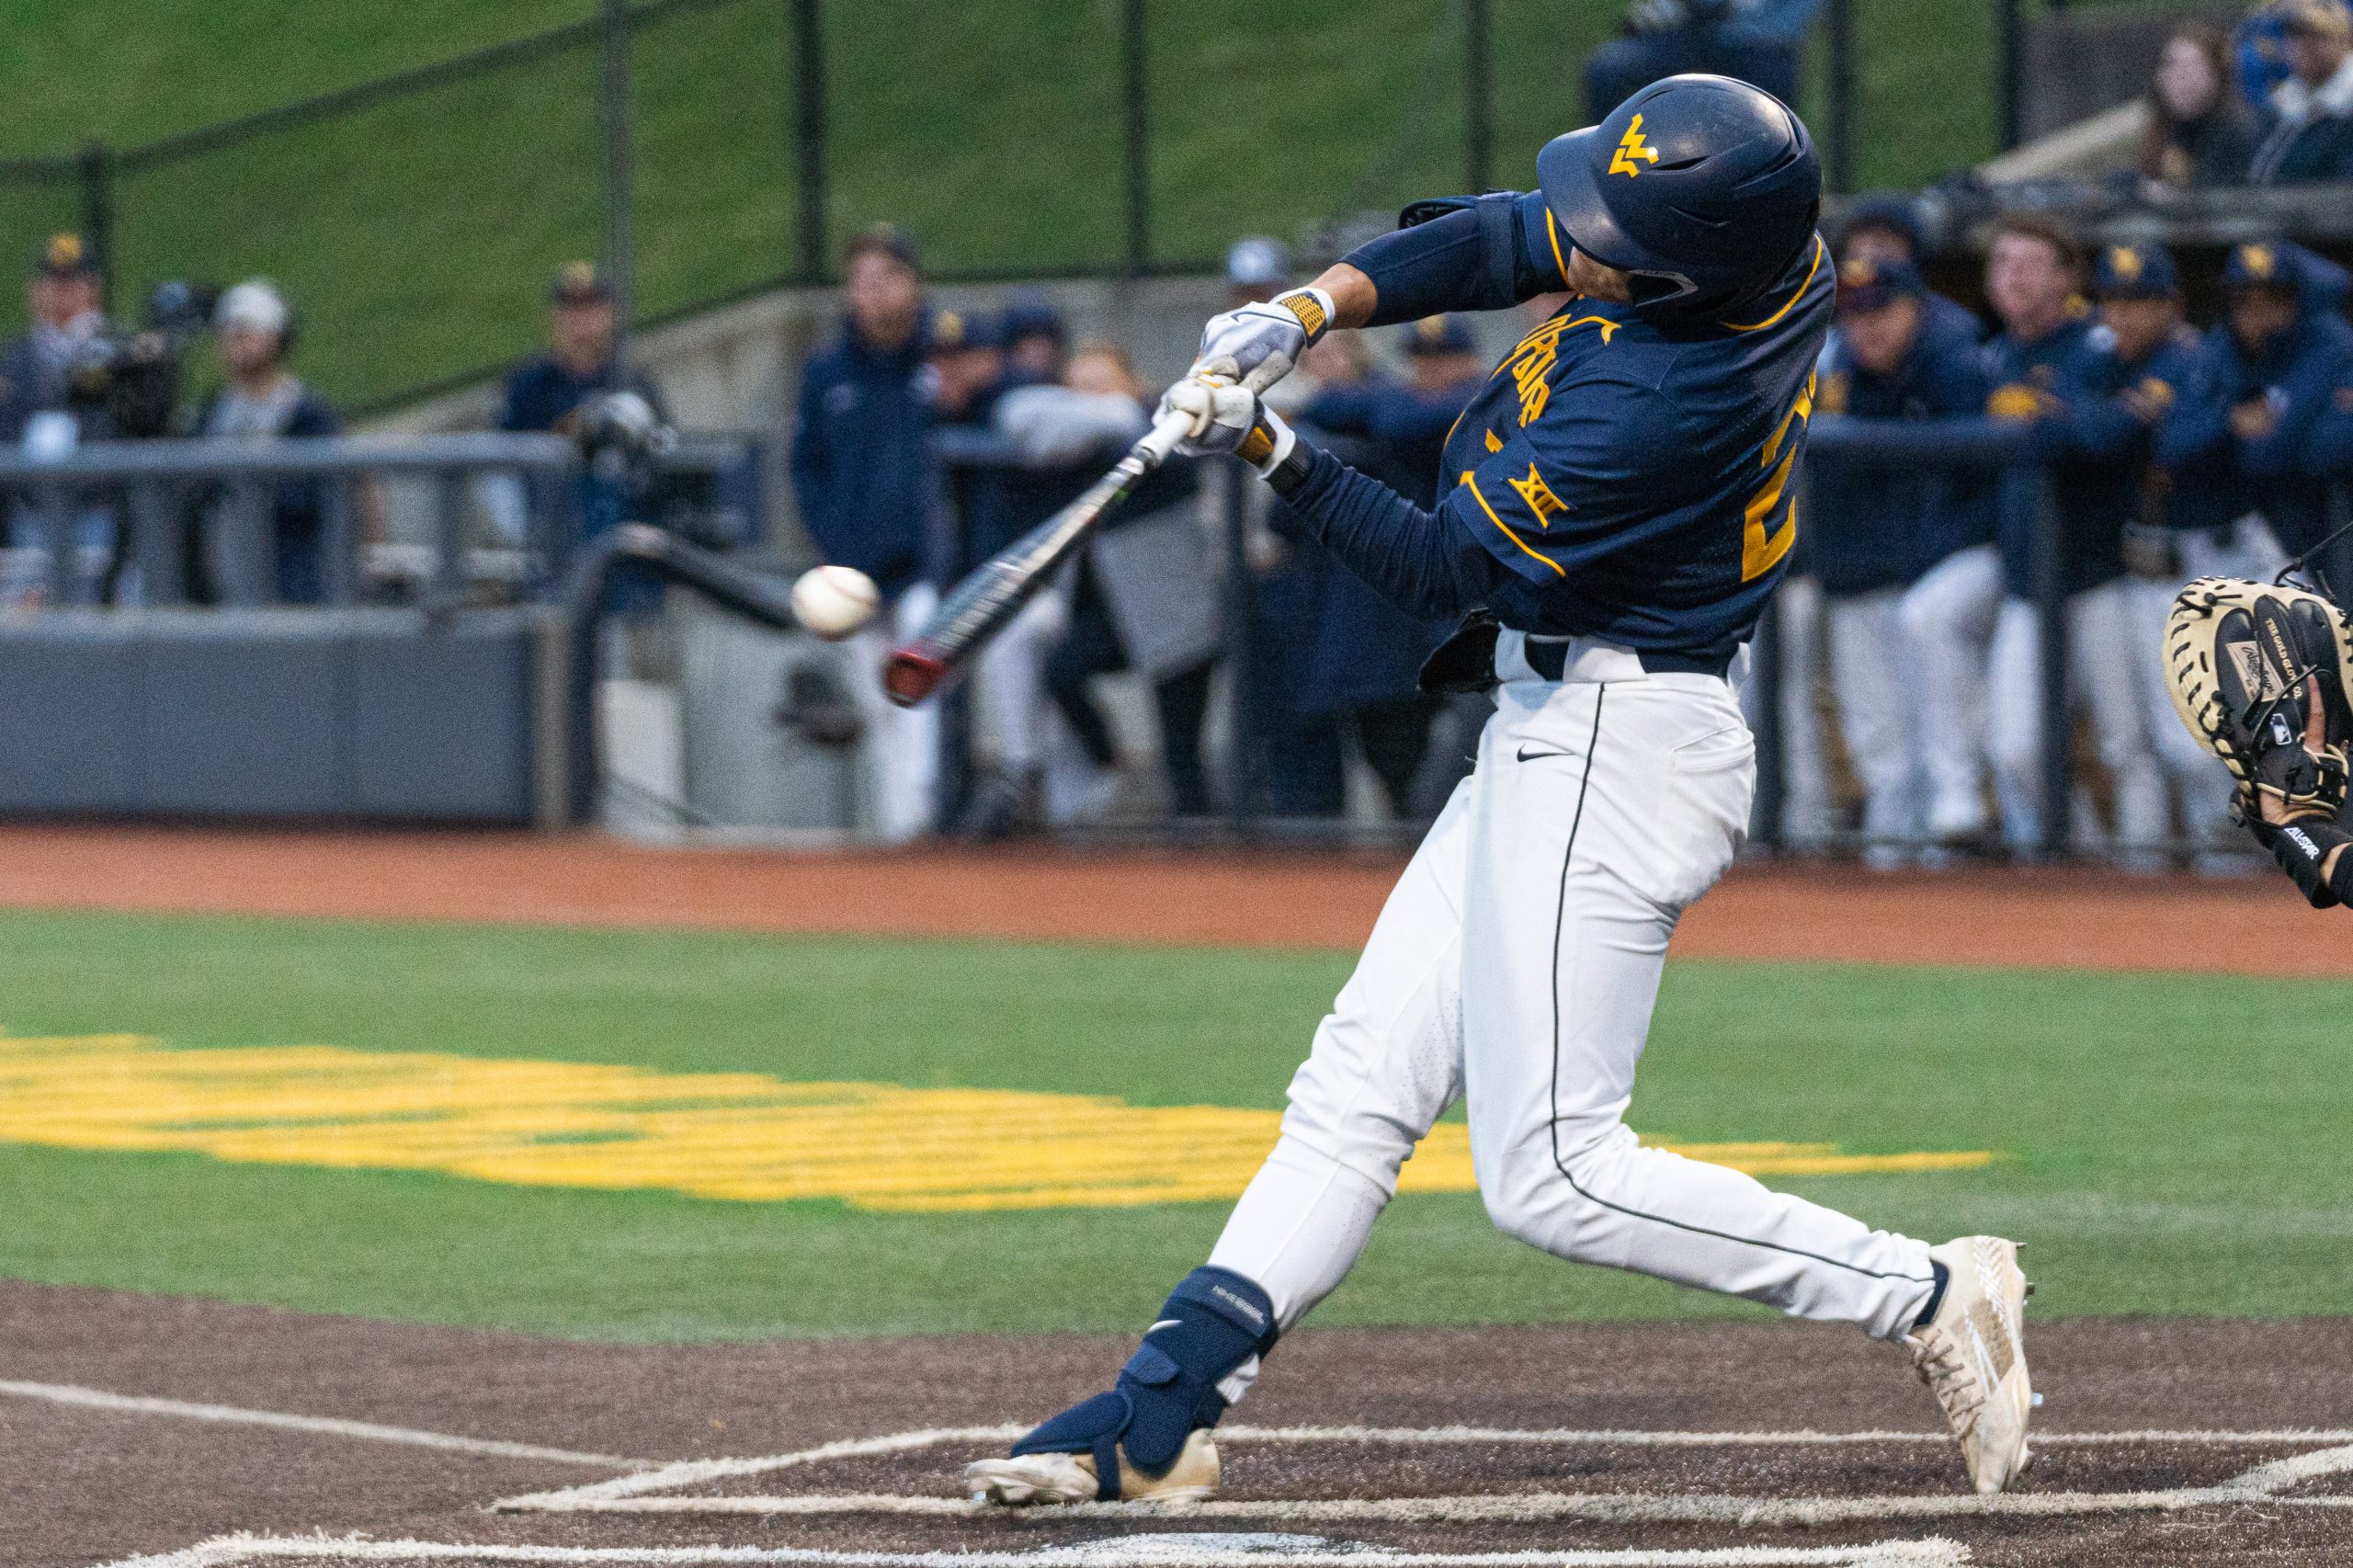 WVU baseball wins first conference series against Kansas State